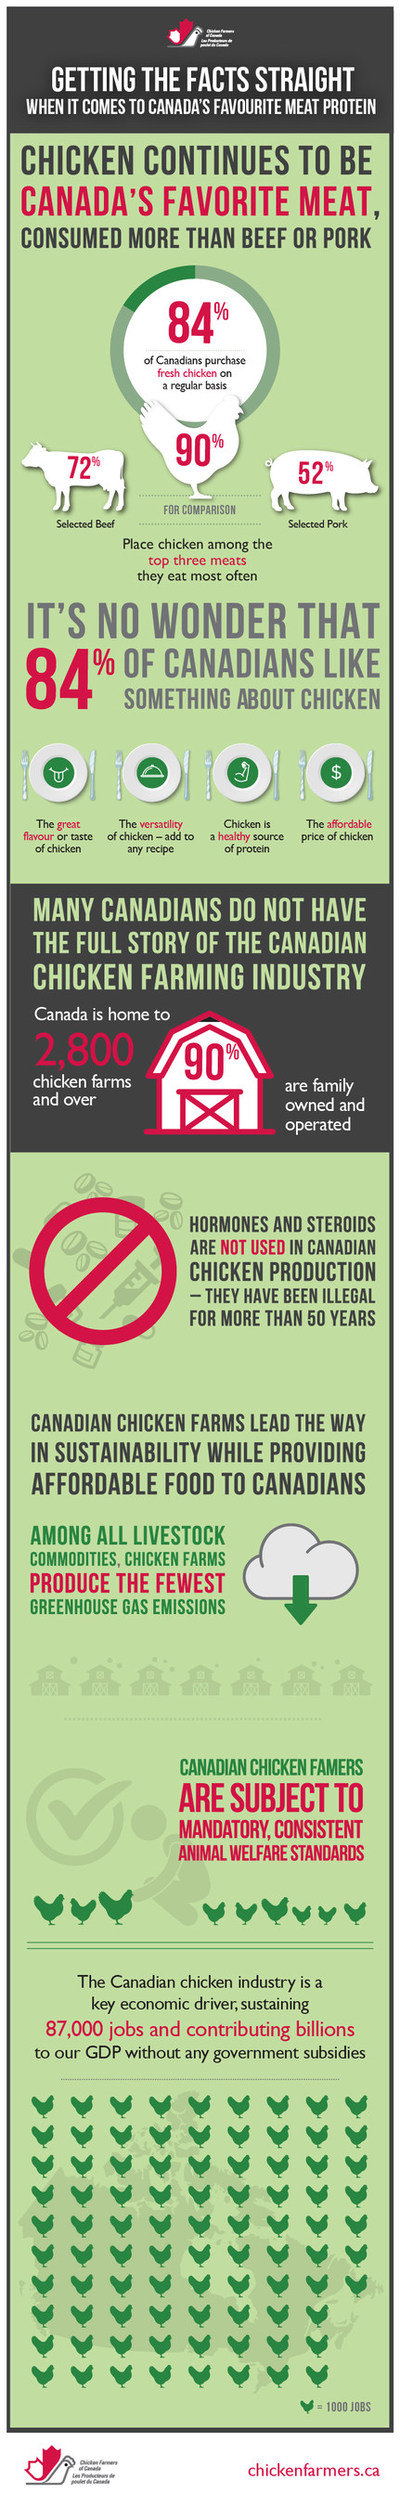 Getting the facts straight when it comes to Canada's favourite meat protein (CNW Group/Chicken Farmers of Canada)